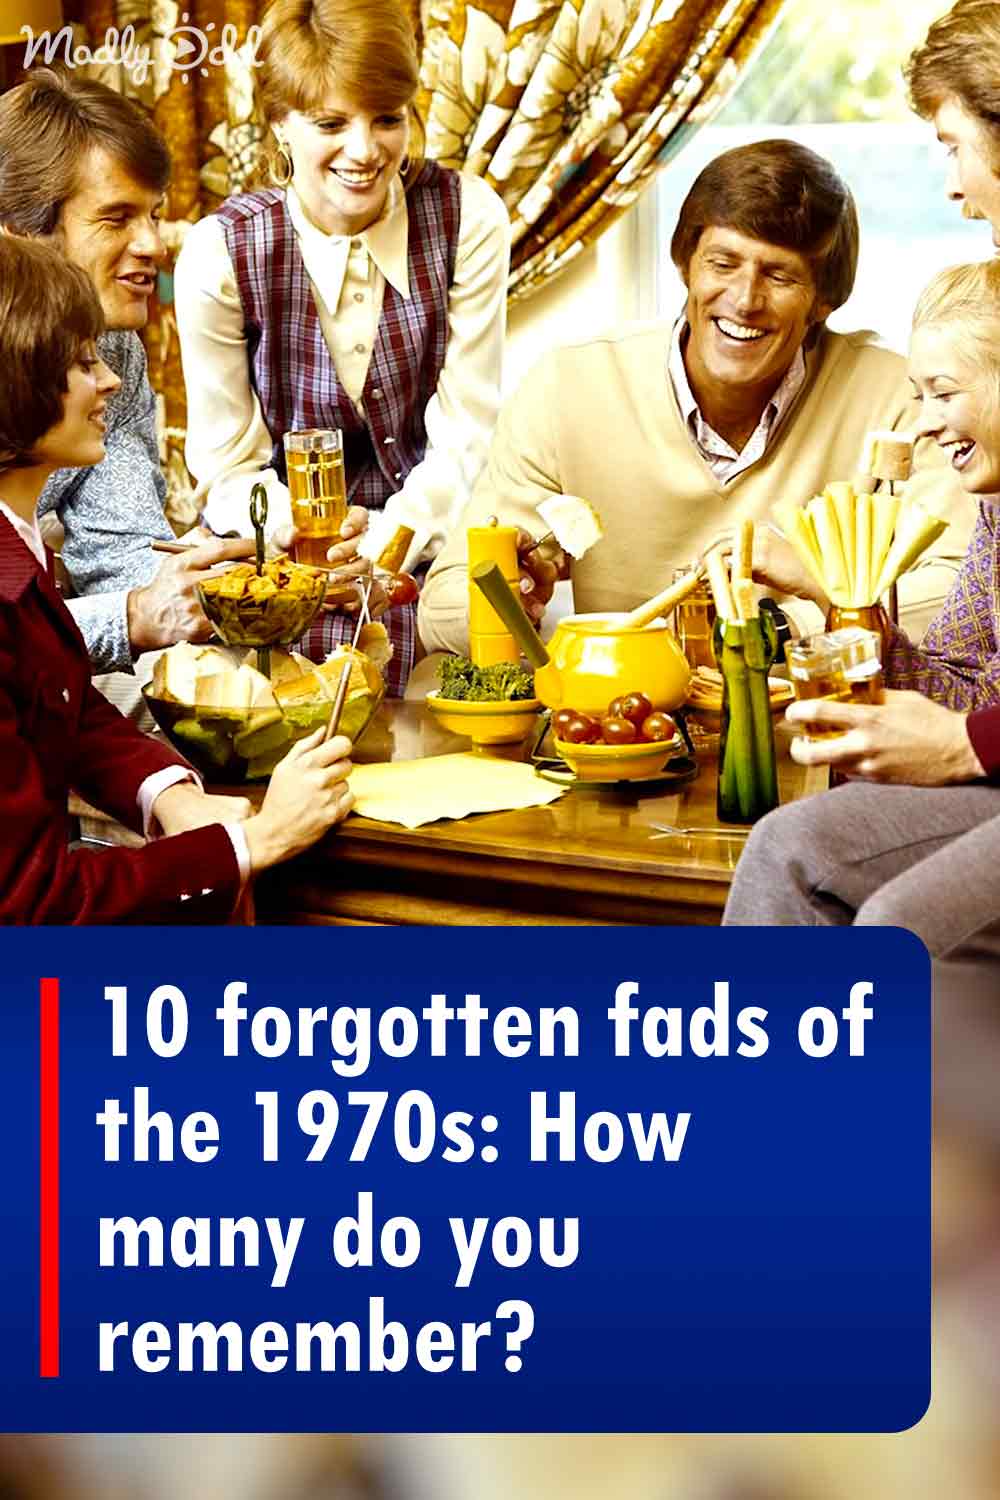 10 forgotten fads of the 1970s: How many do you remember?